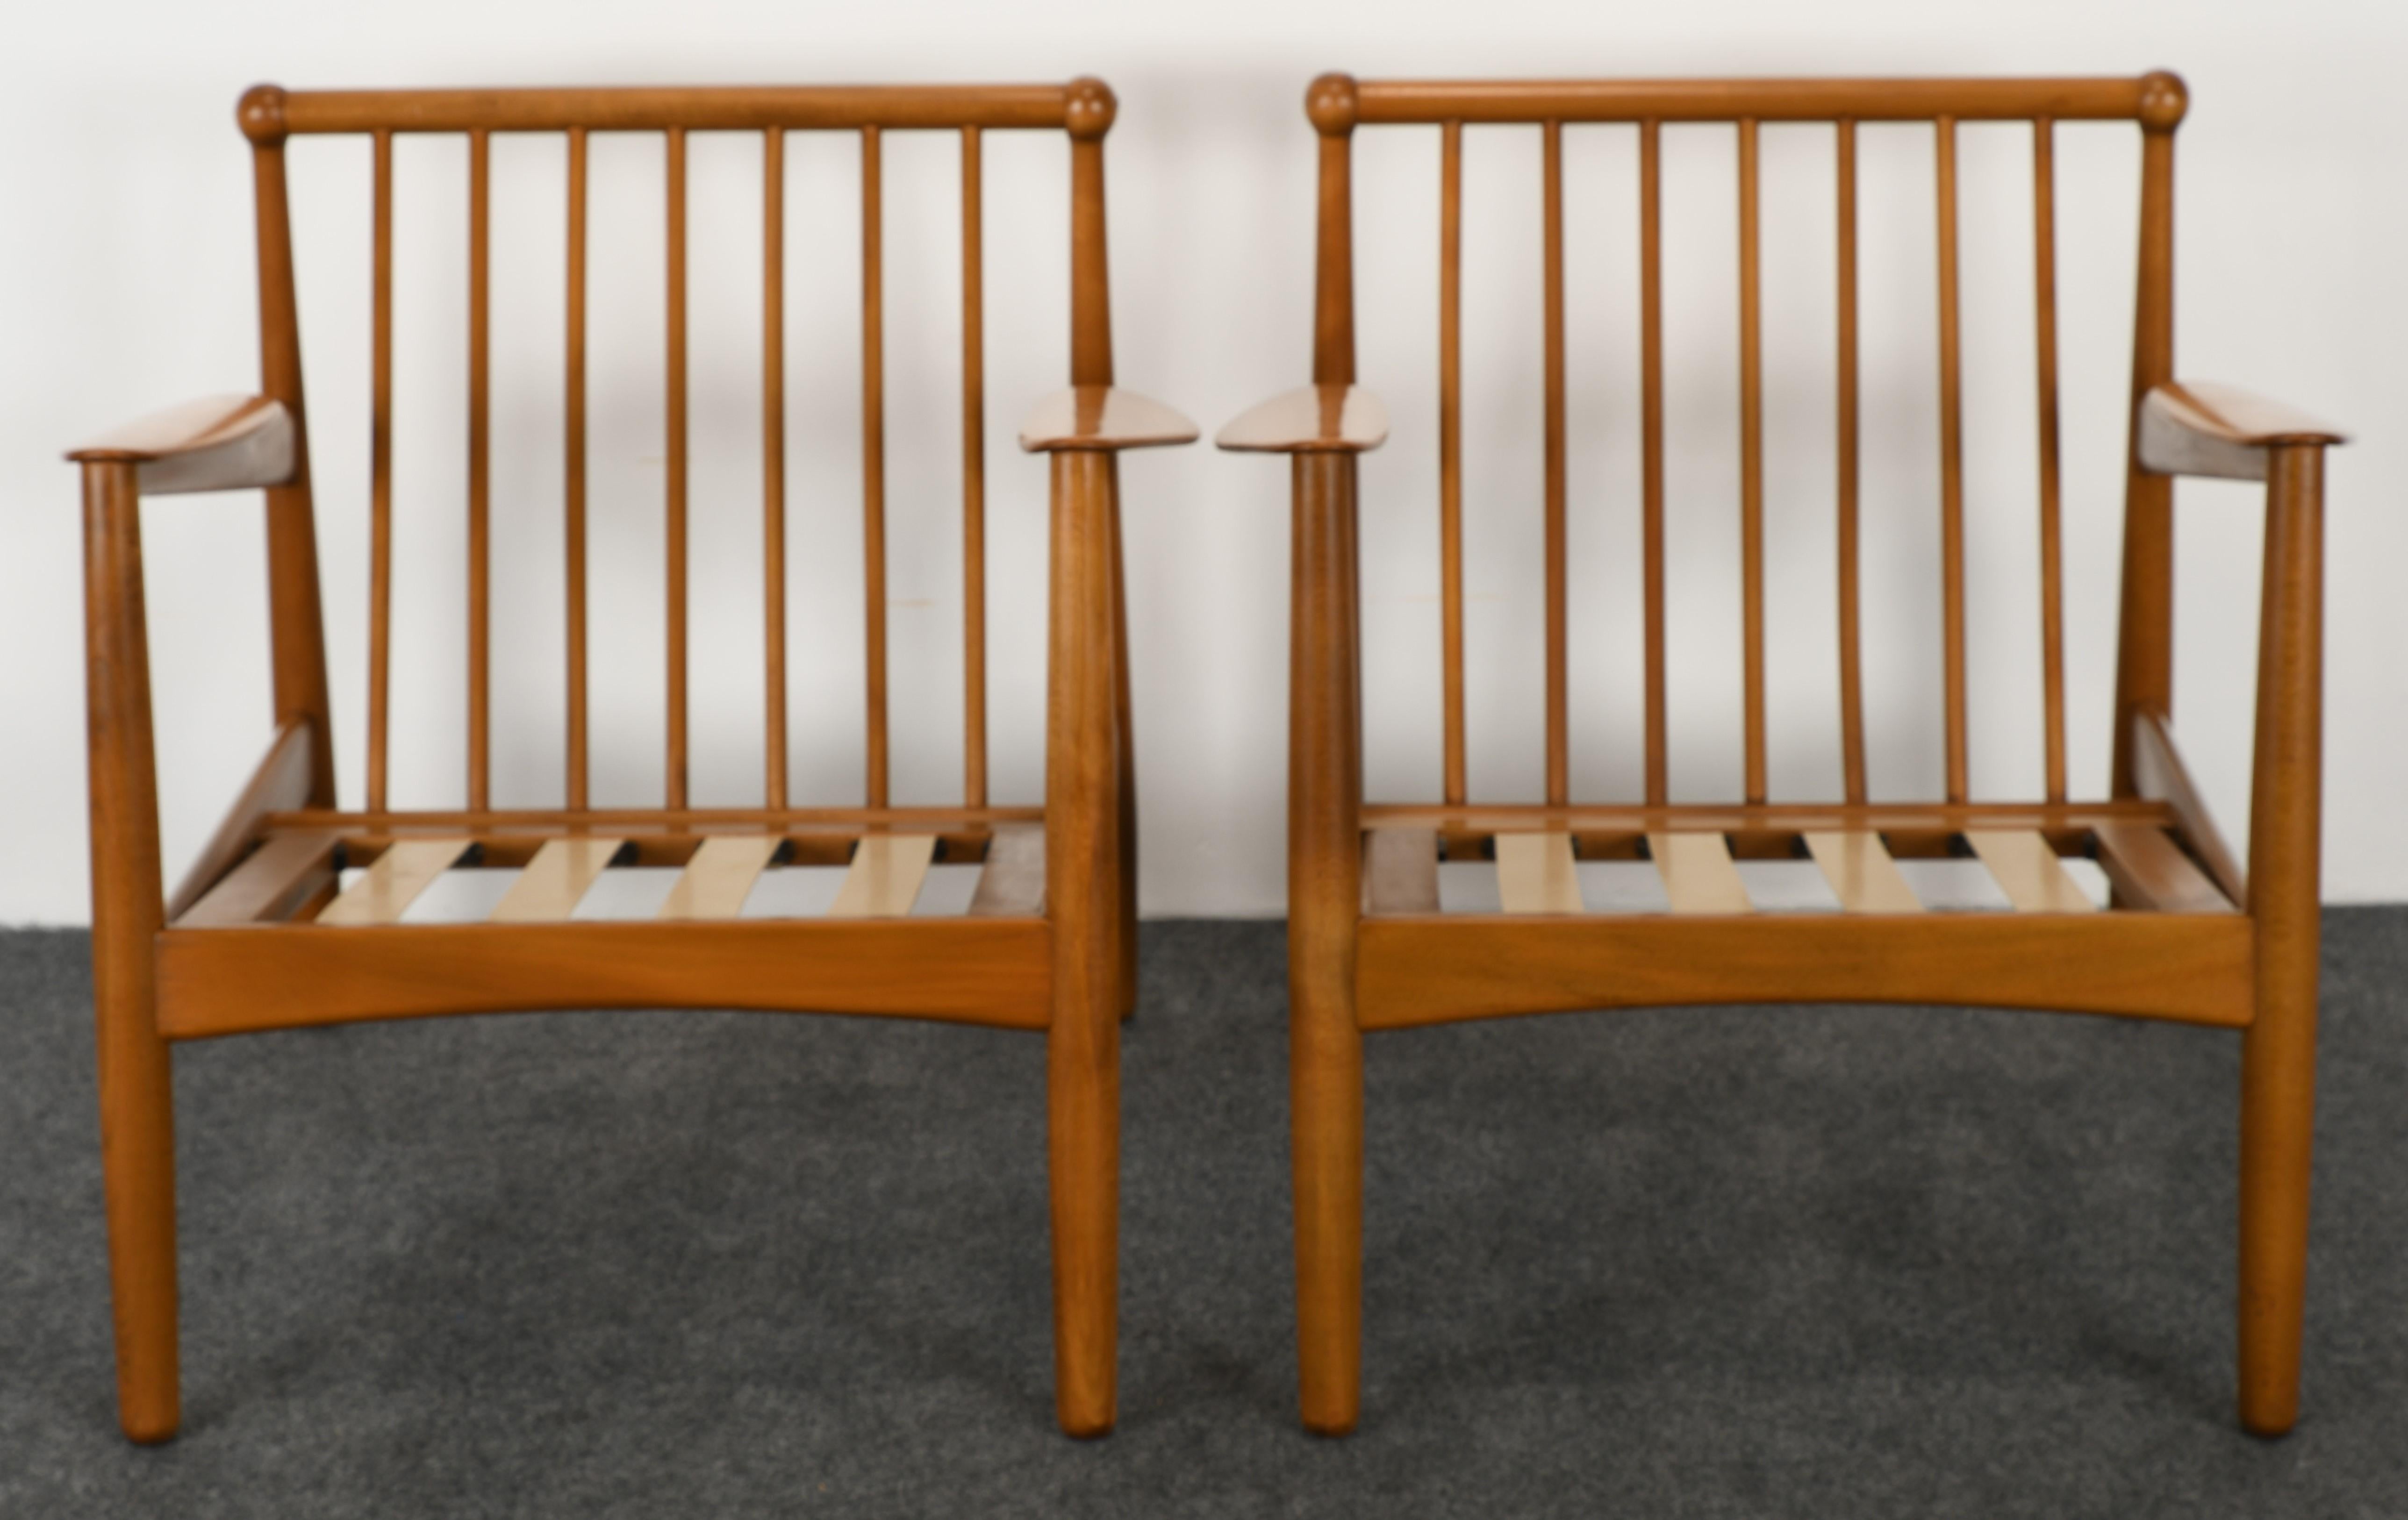 Pair of Danish Modern Chairs by P. Jeppesen, 1955 1